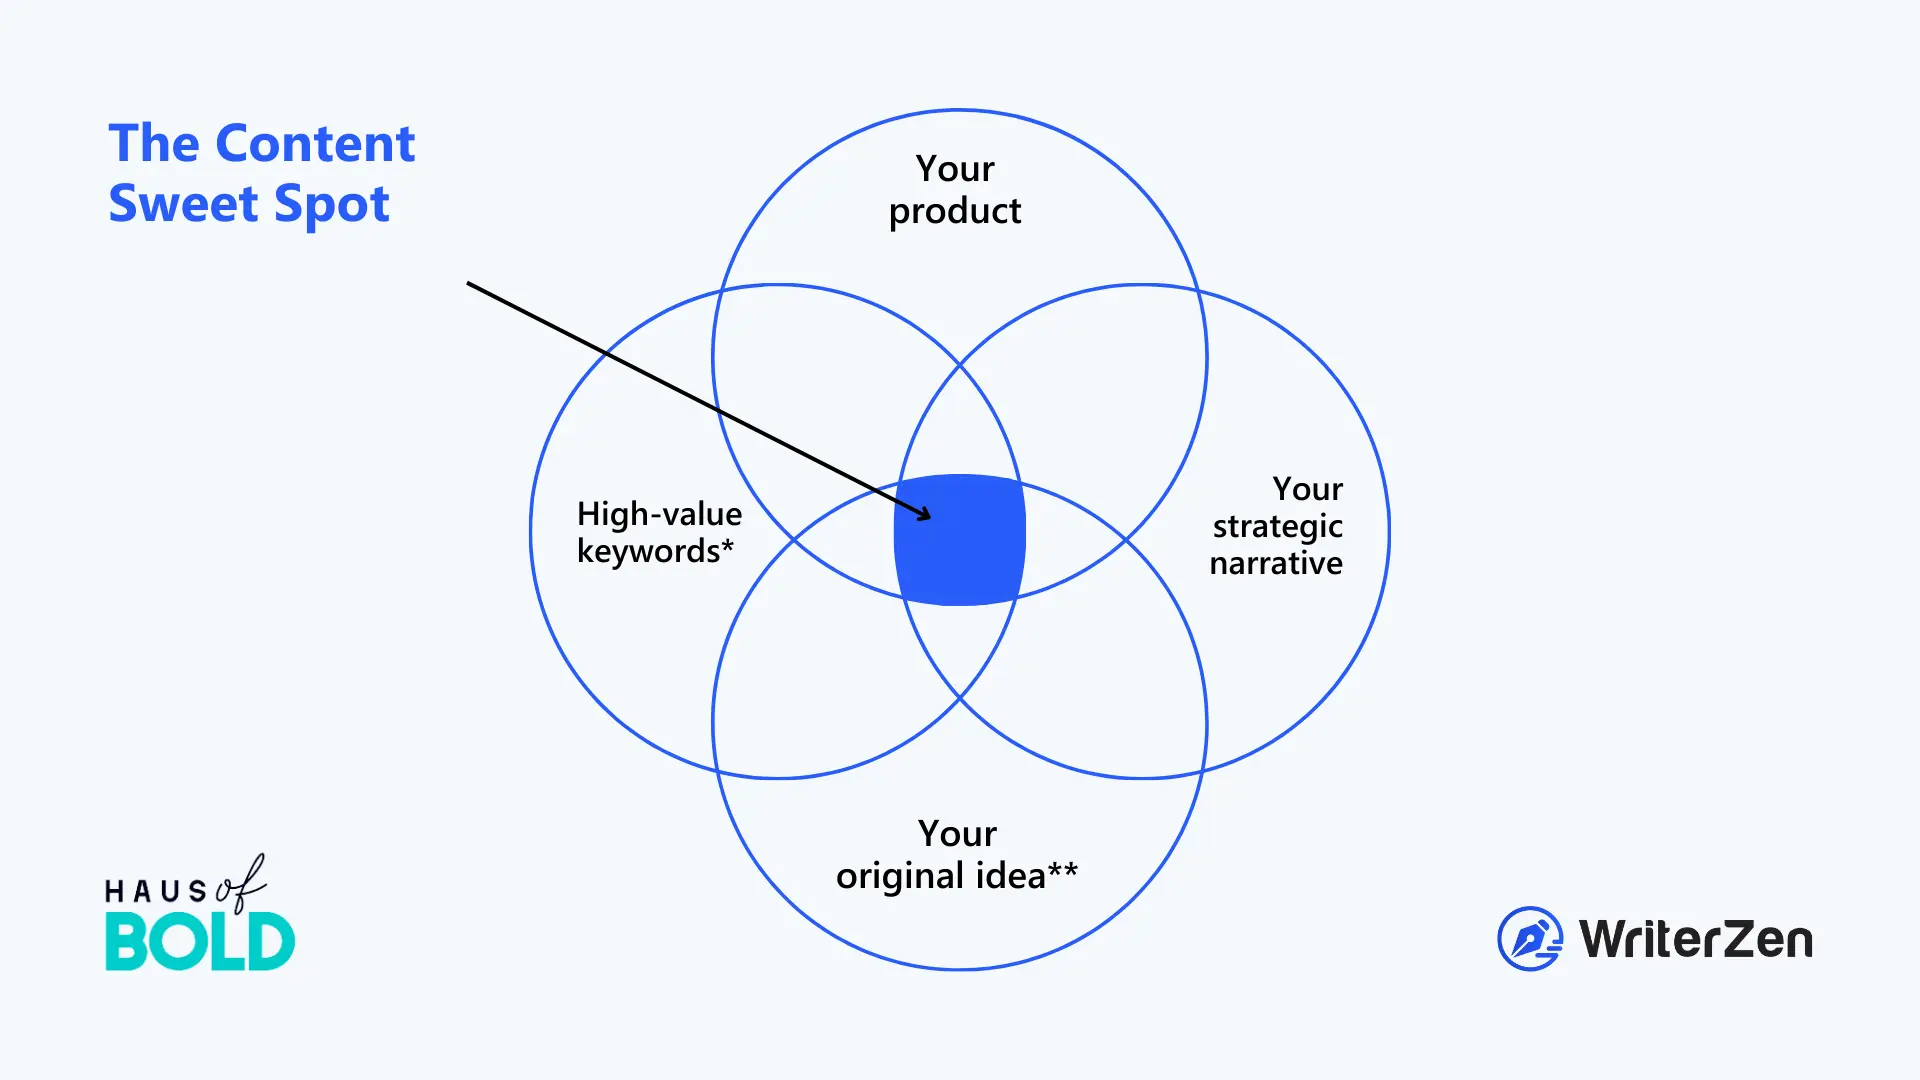 The Content Sweet Spot